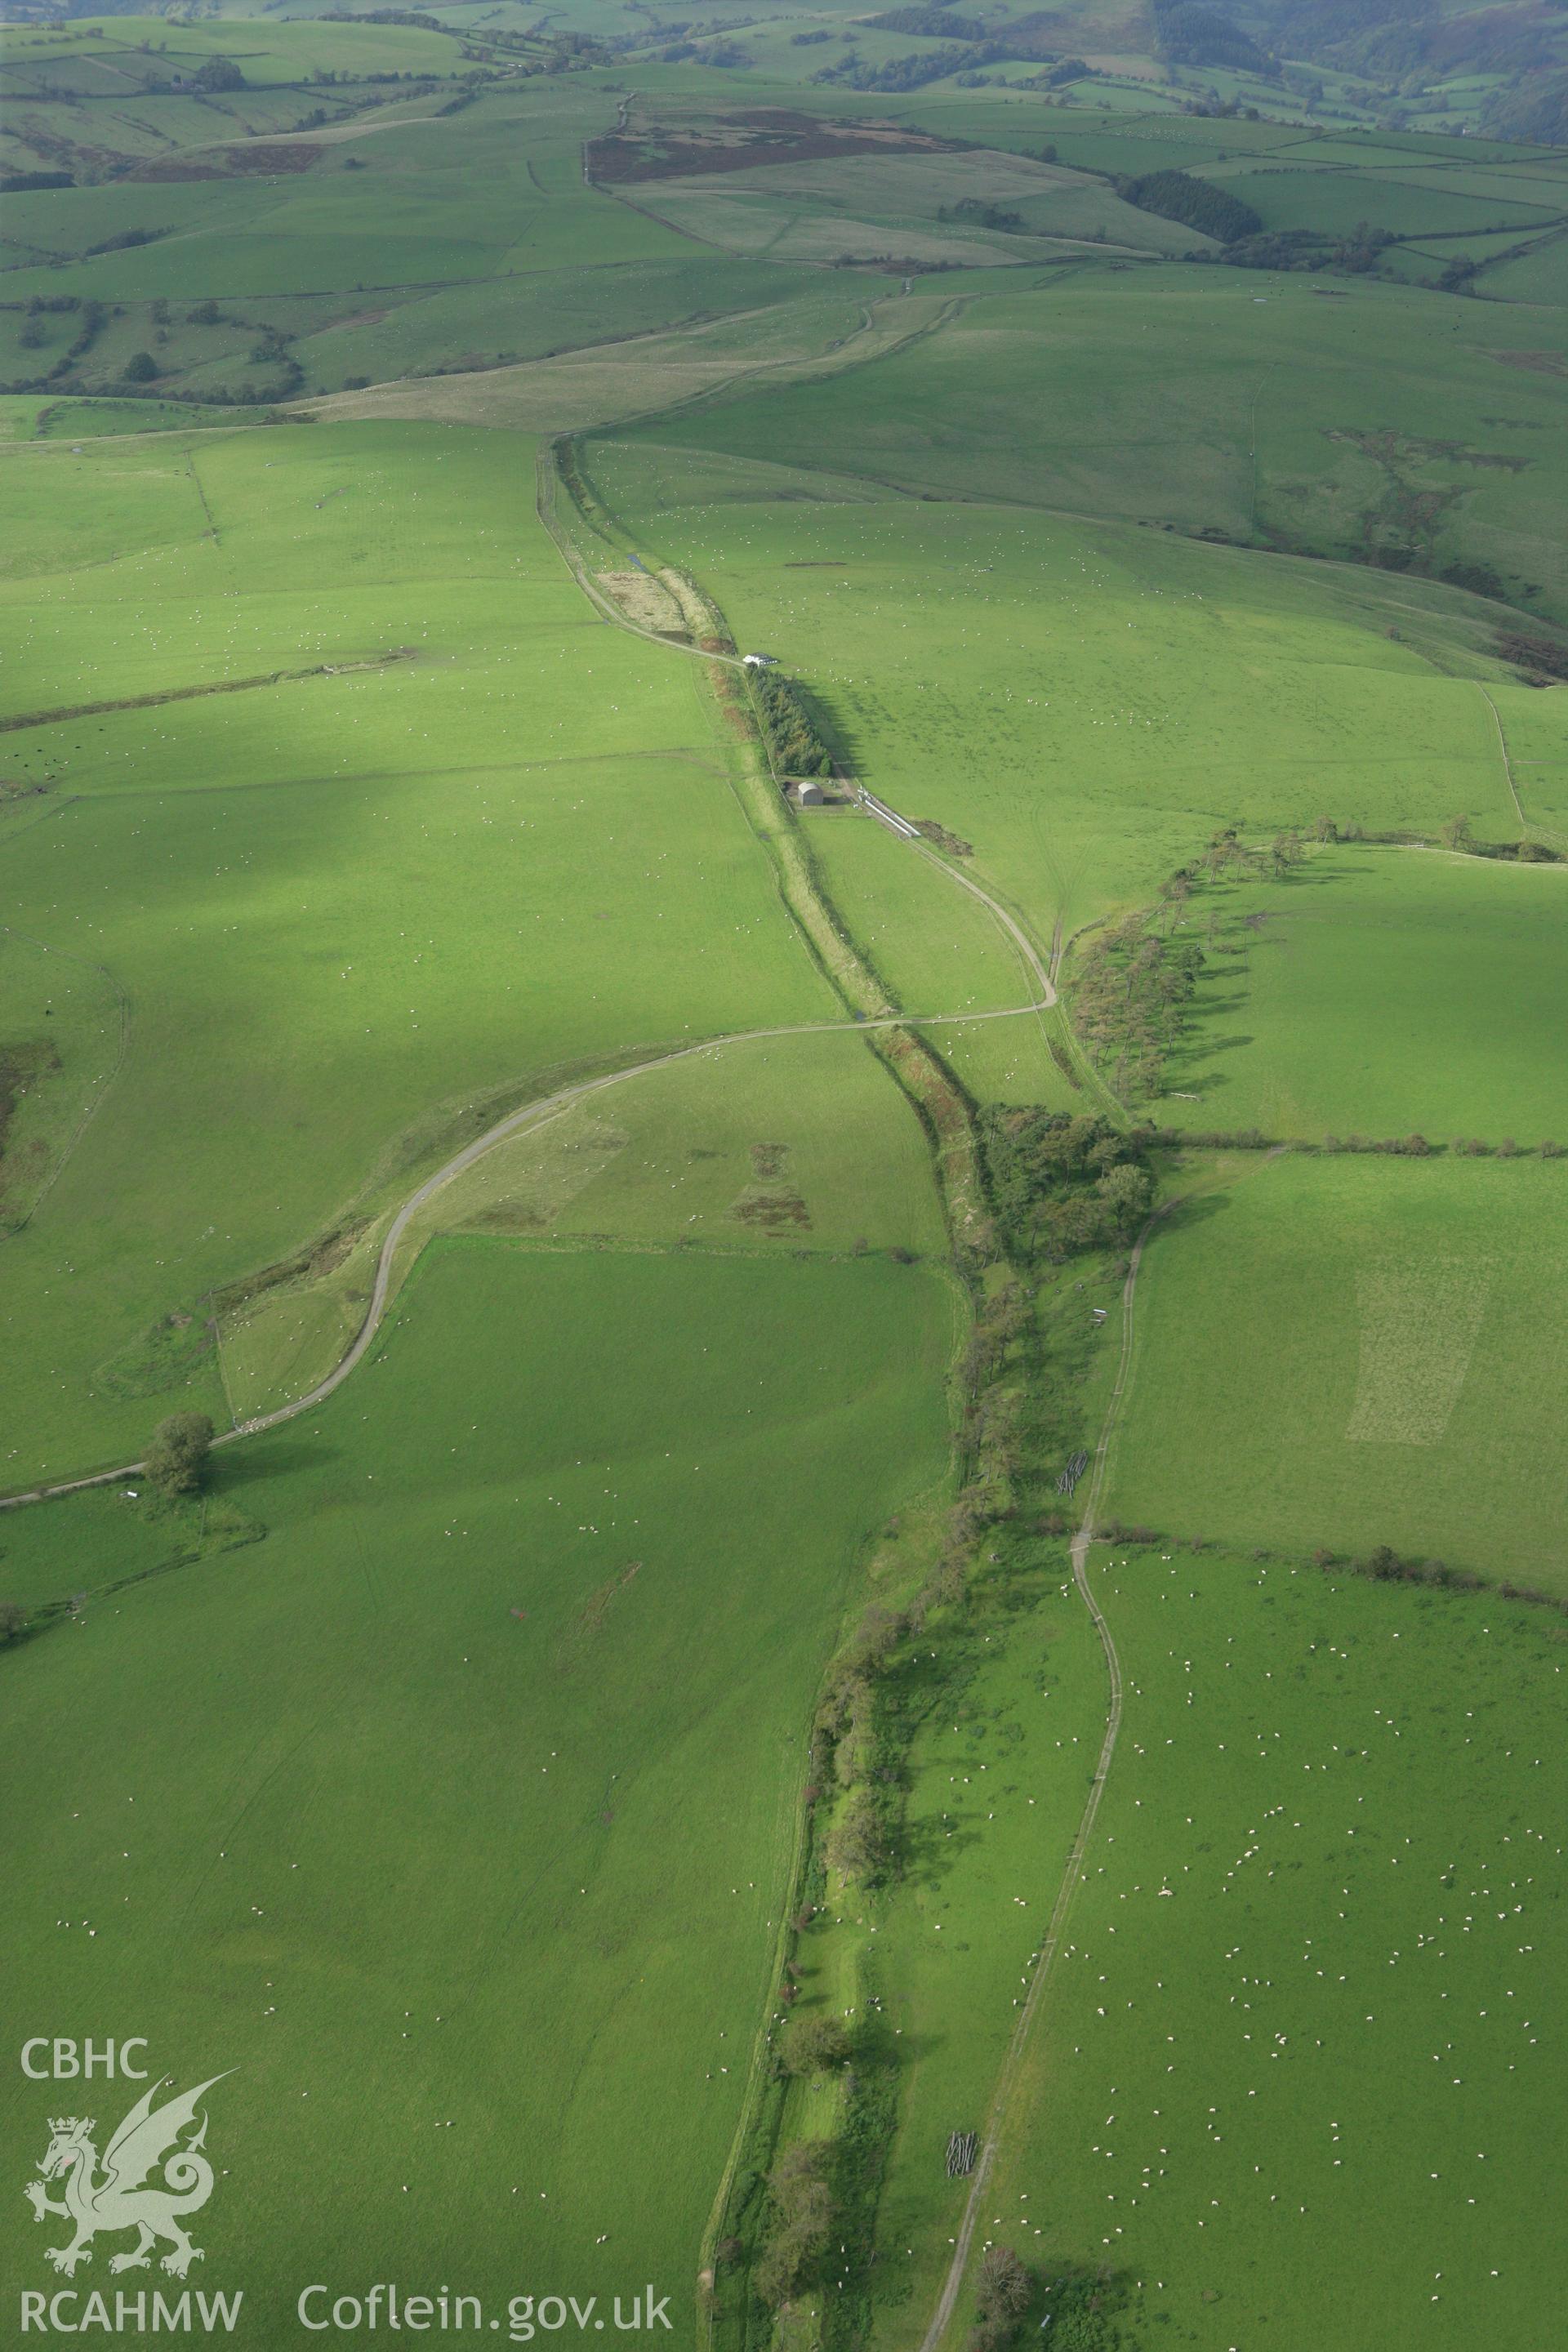 RCAHMW colour oblique photograph of Offa's Dyke ENGLAND. Taken by Toby Driver on 10/10/2008.